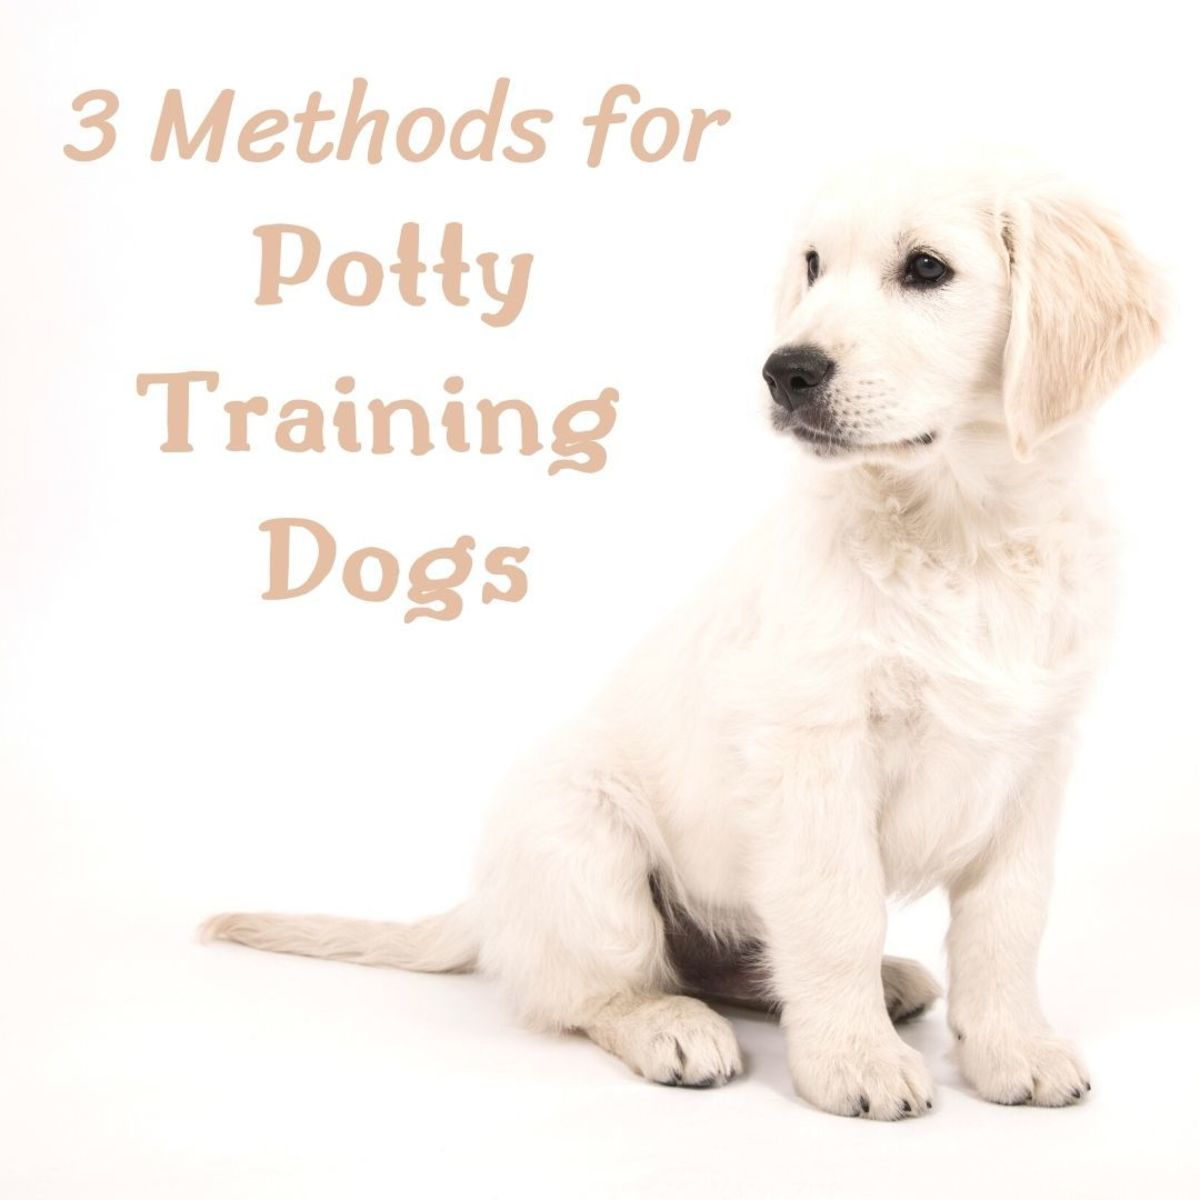 toilet training 5 month old dog Toilet training 5 month old puppy takes patience and diligence. get